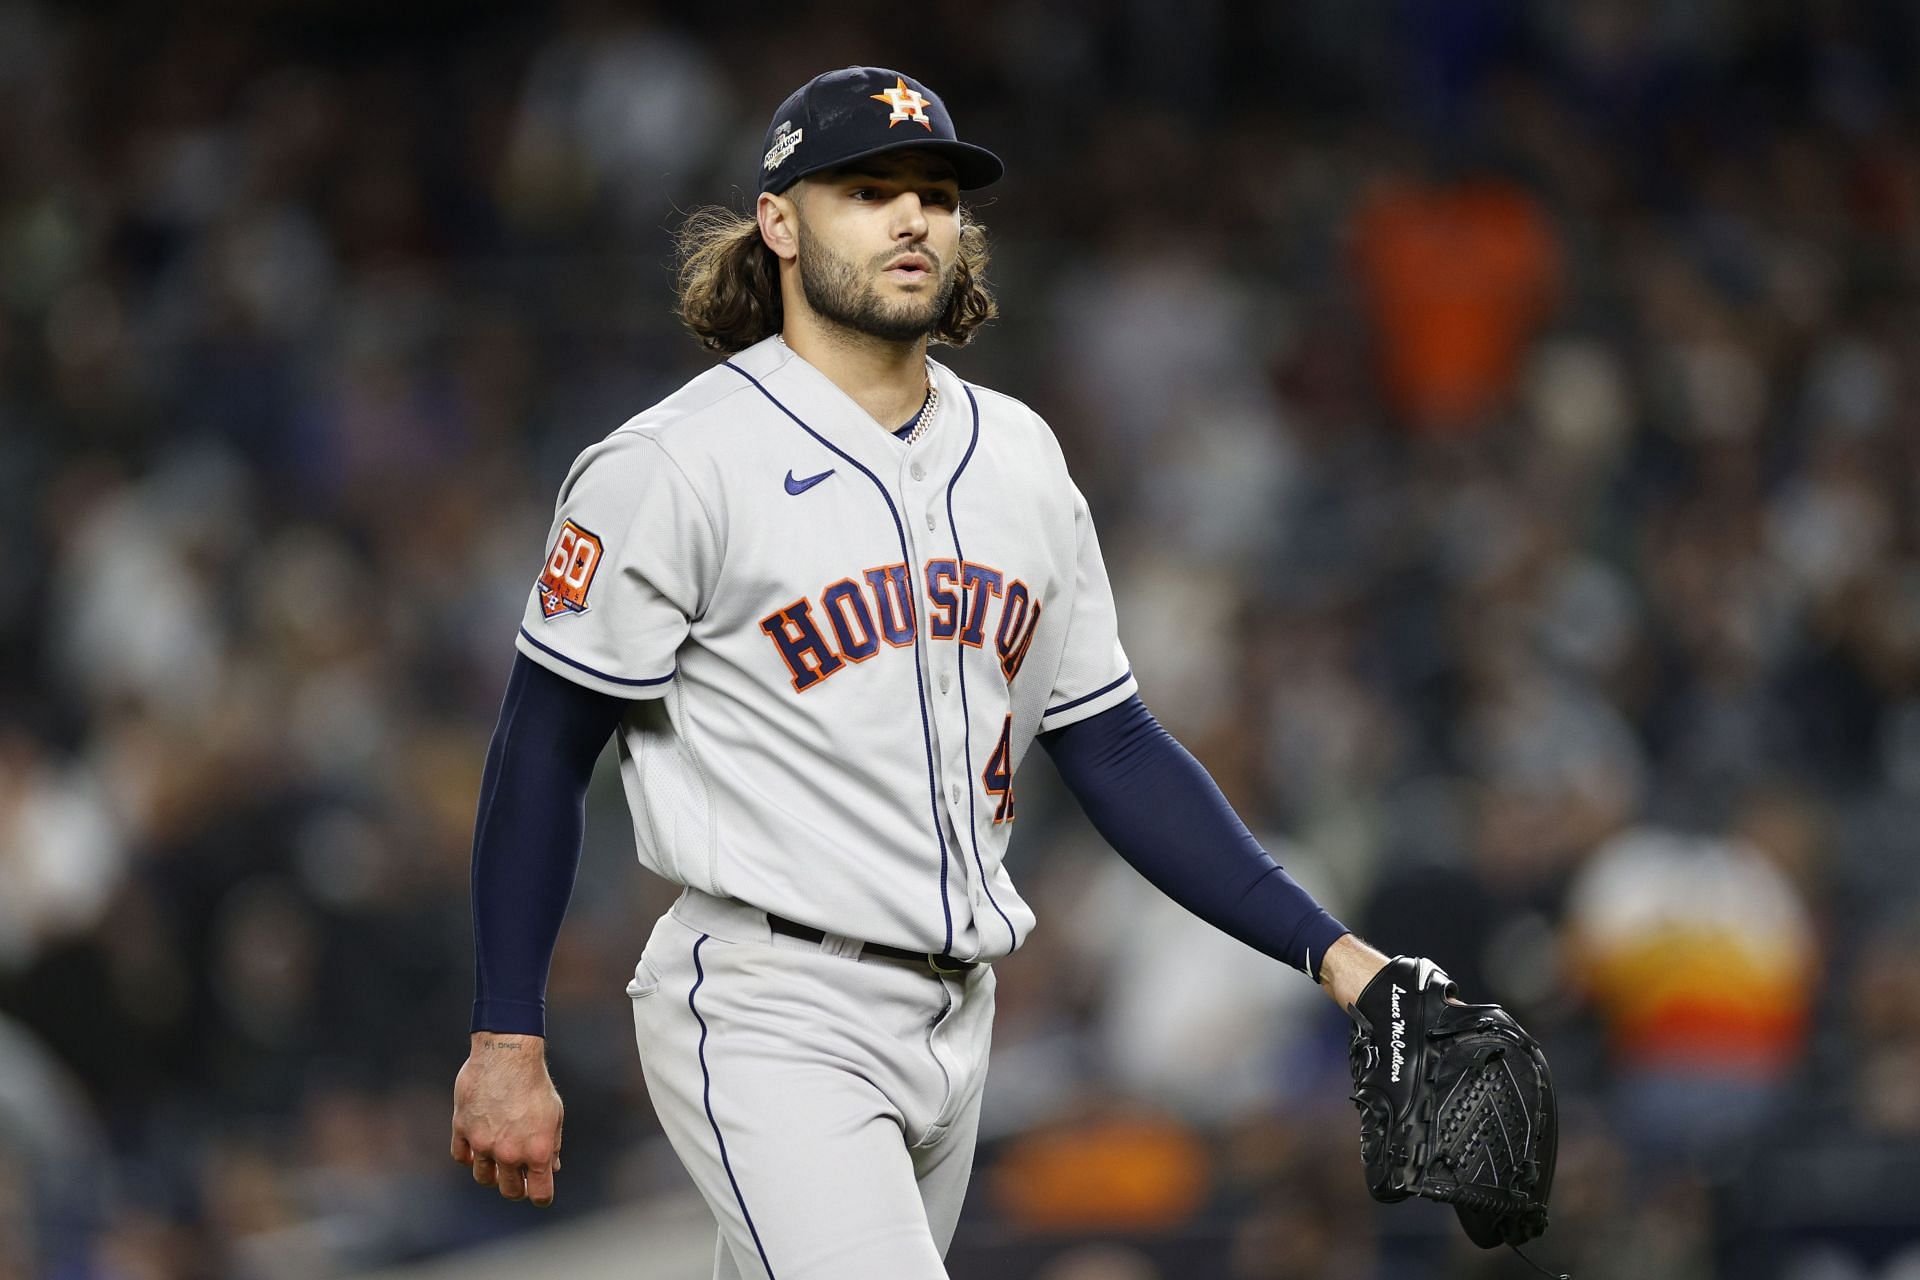 Lance McCullers Jr. #43 of the Houston Astros walks off the mound